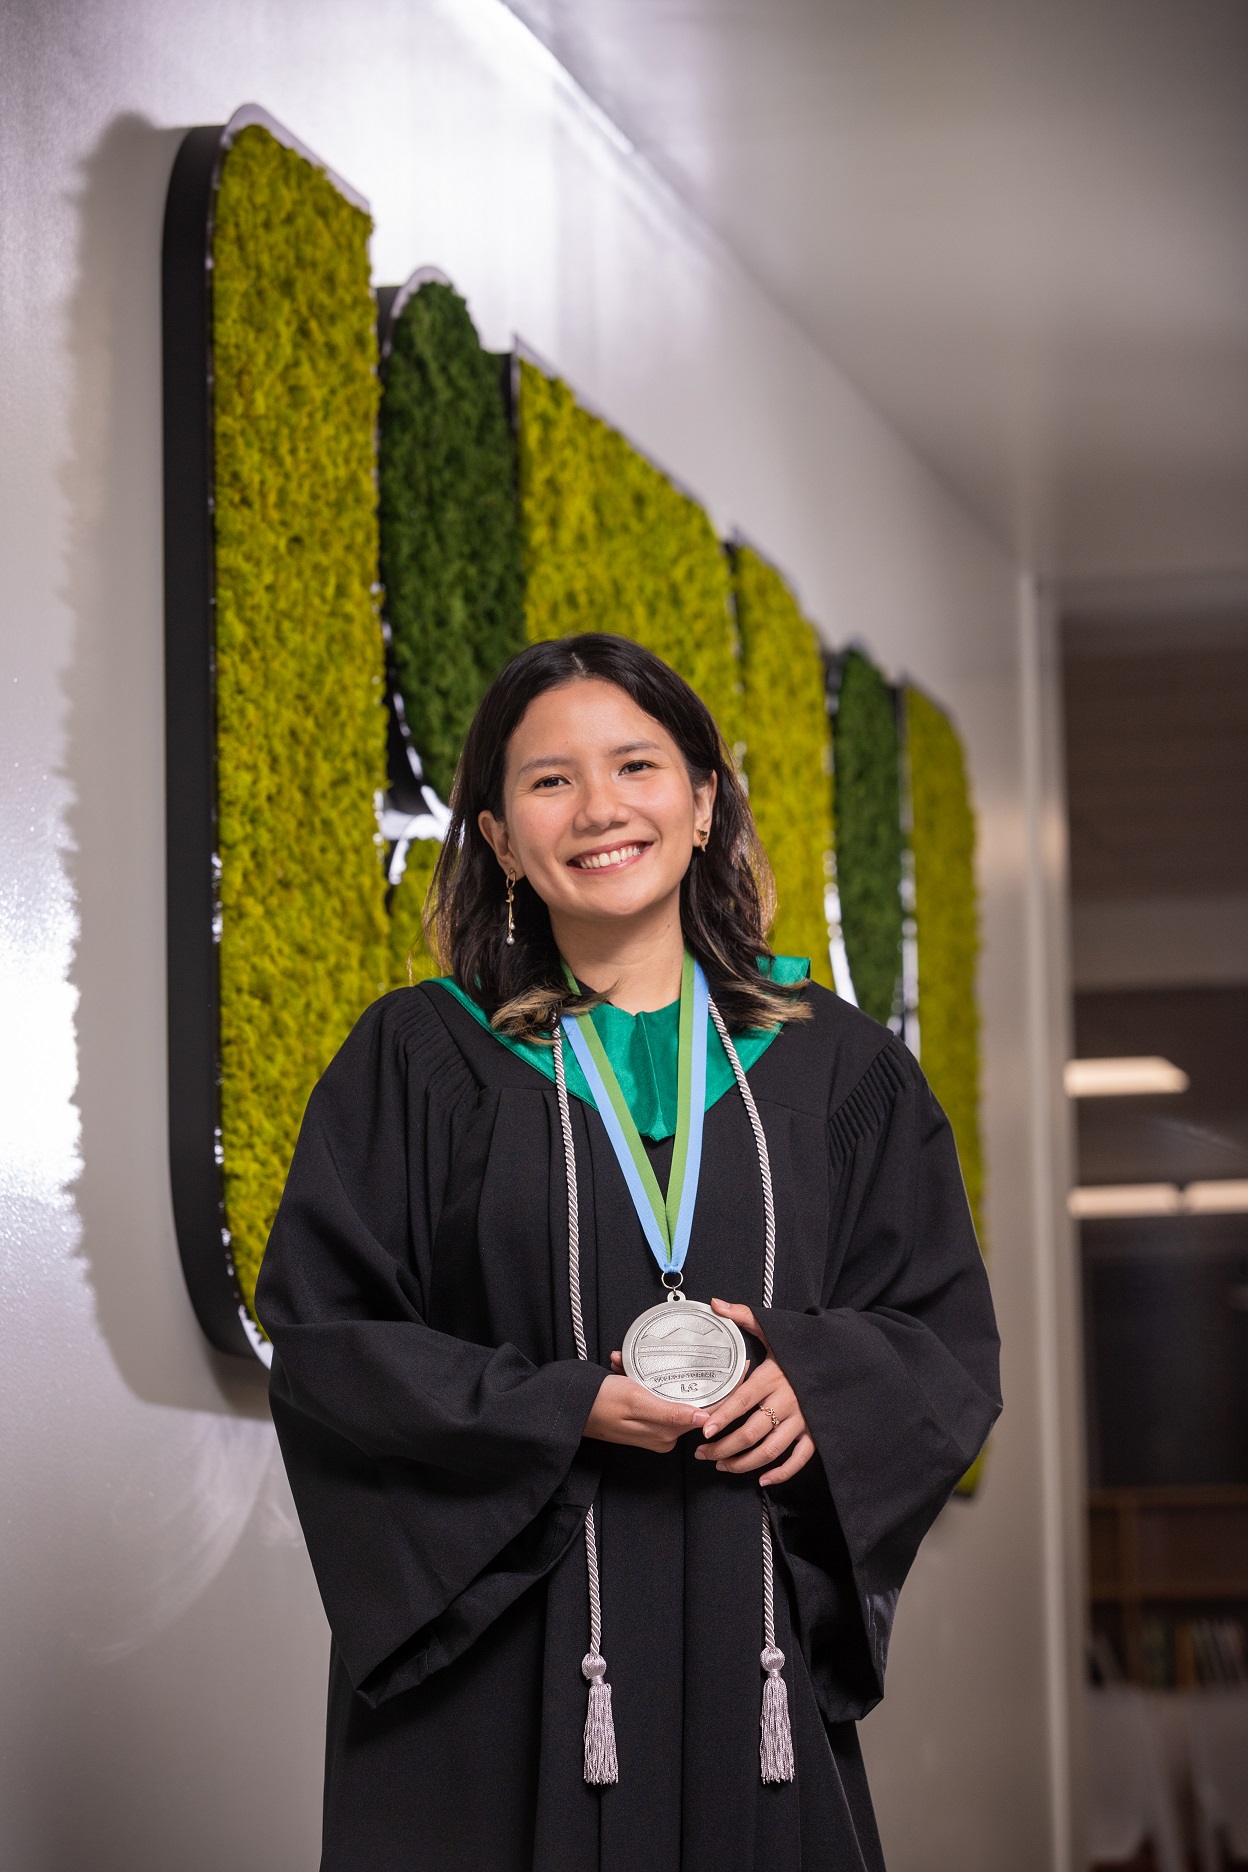 A young woman wearing a graduation gown smiles for the camera